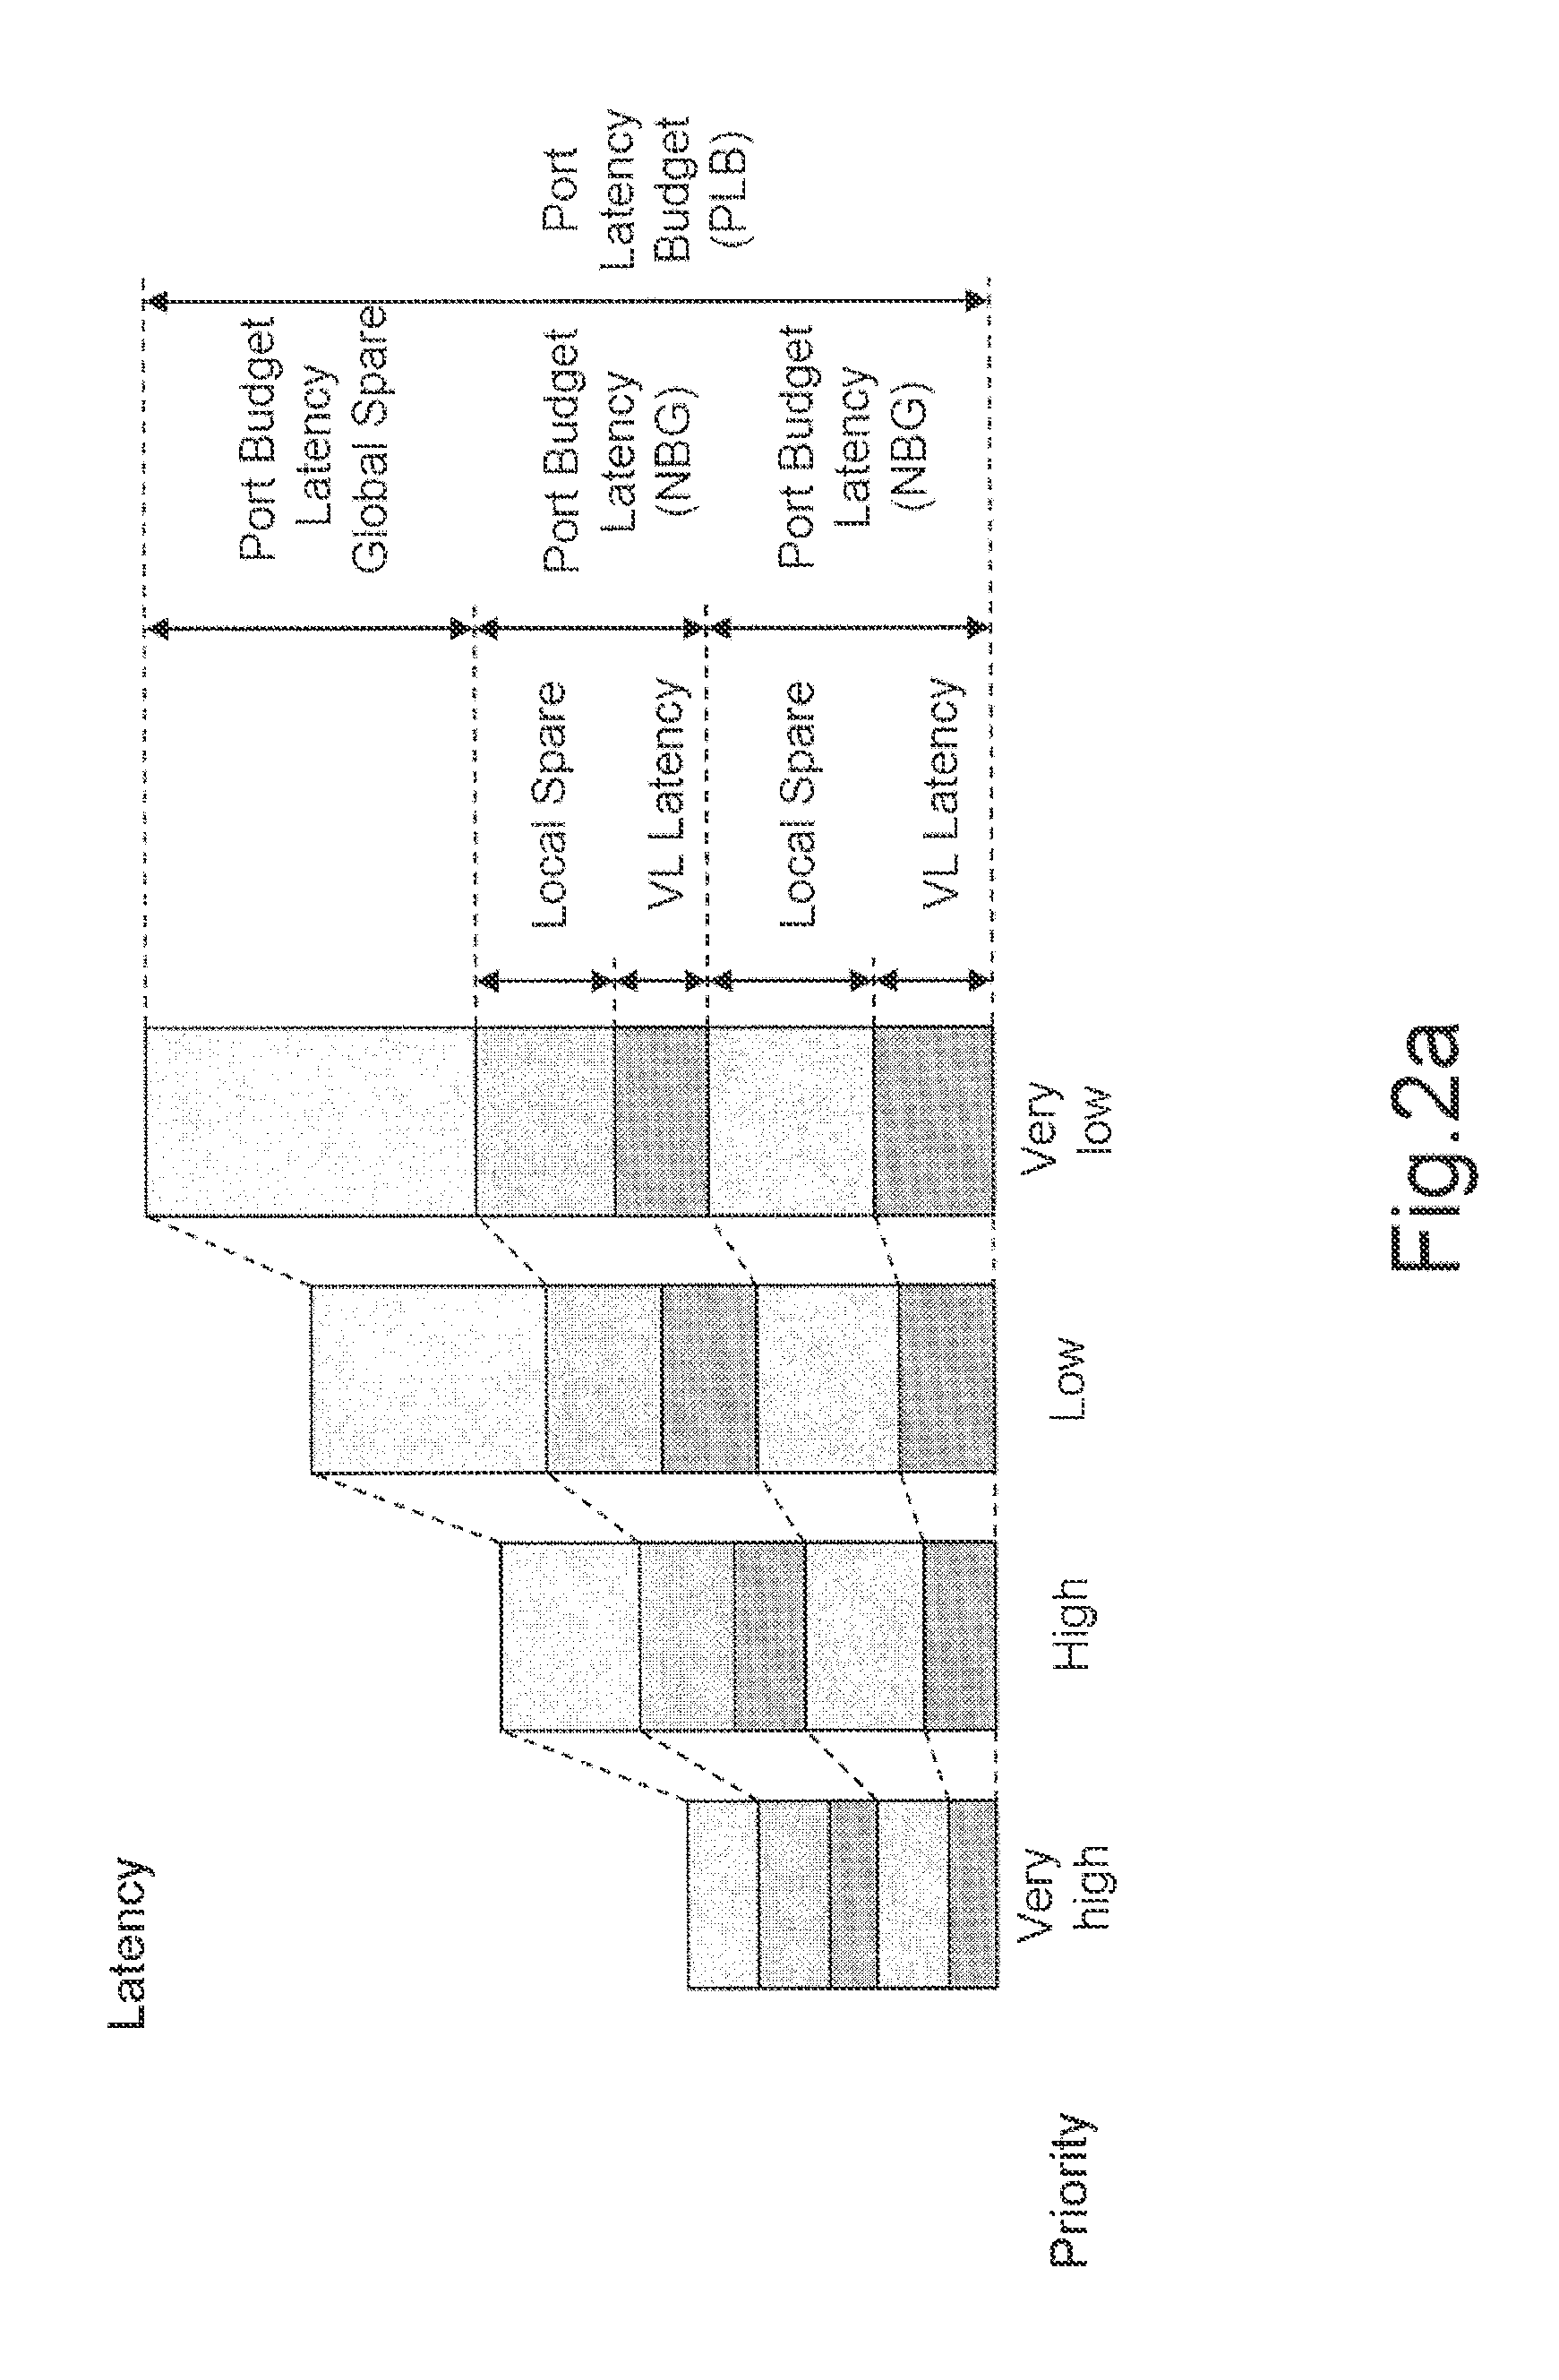 Method and Device for the Validation of Networks